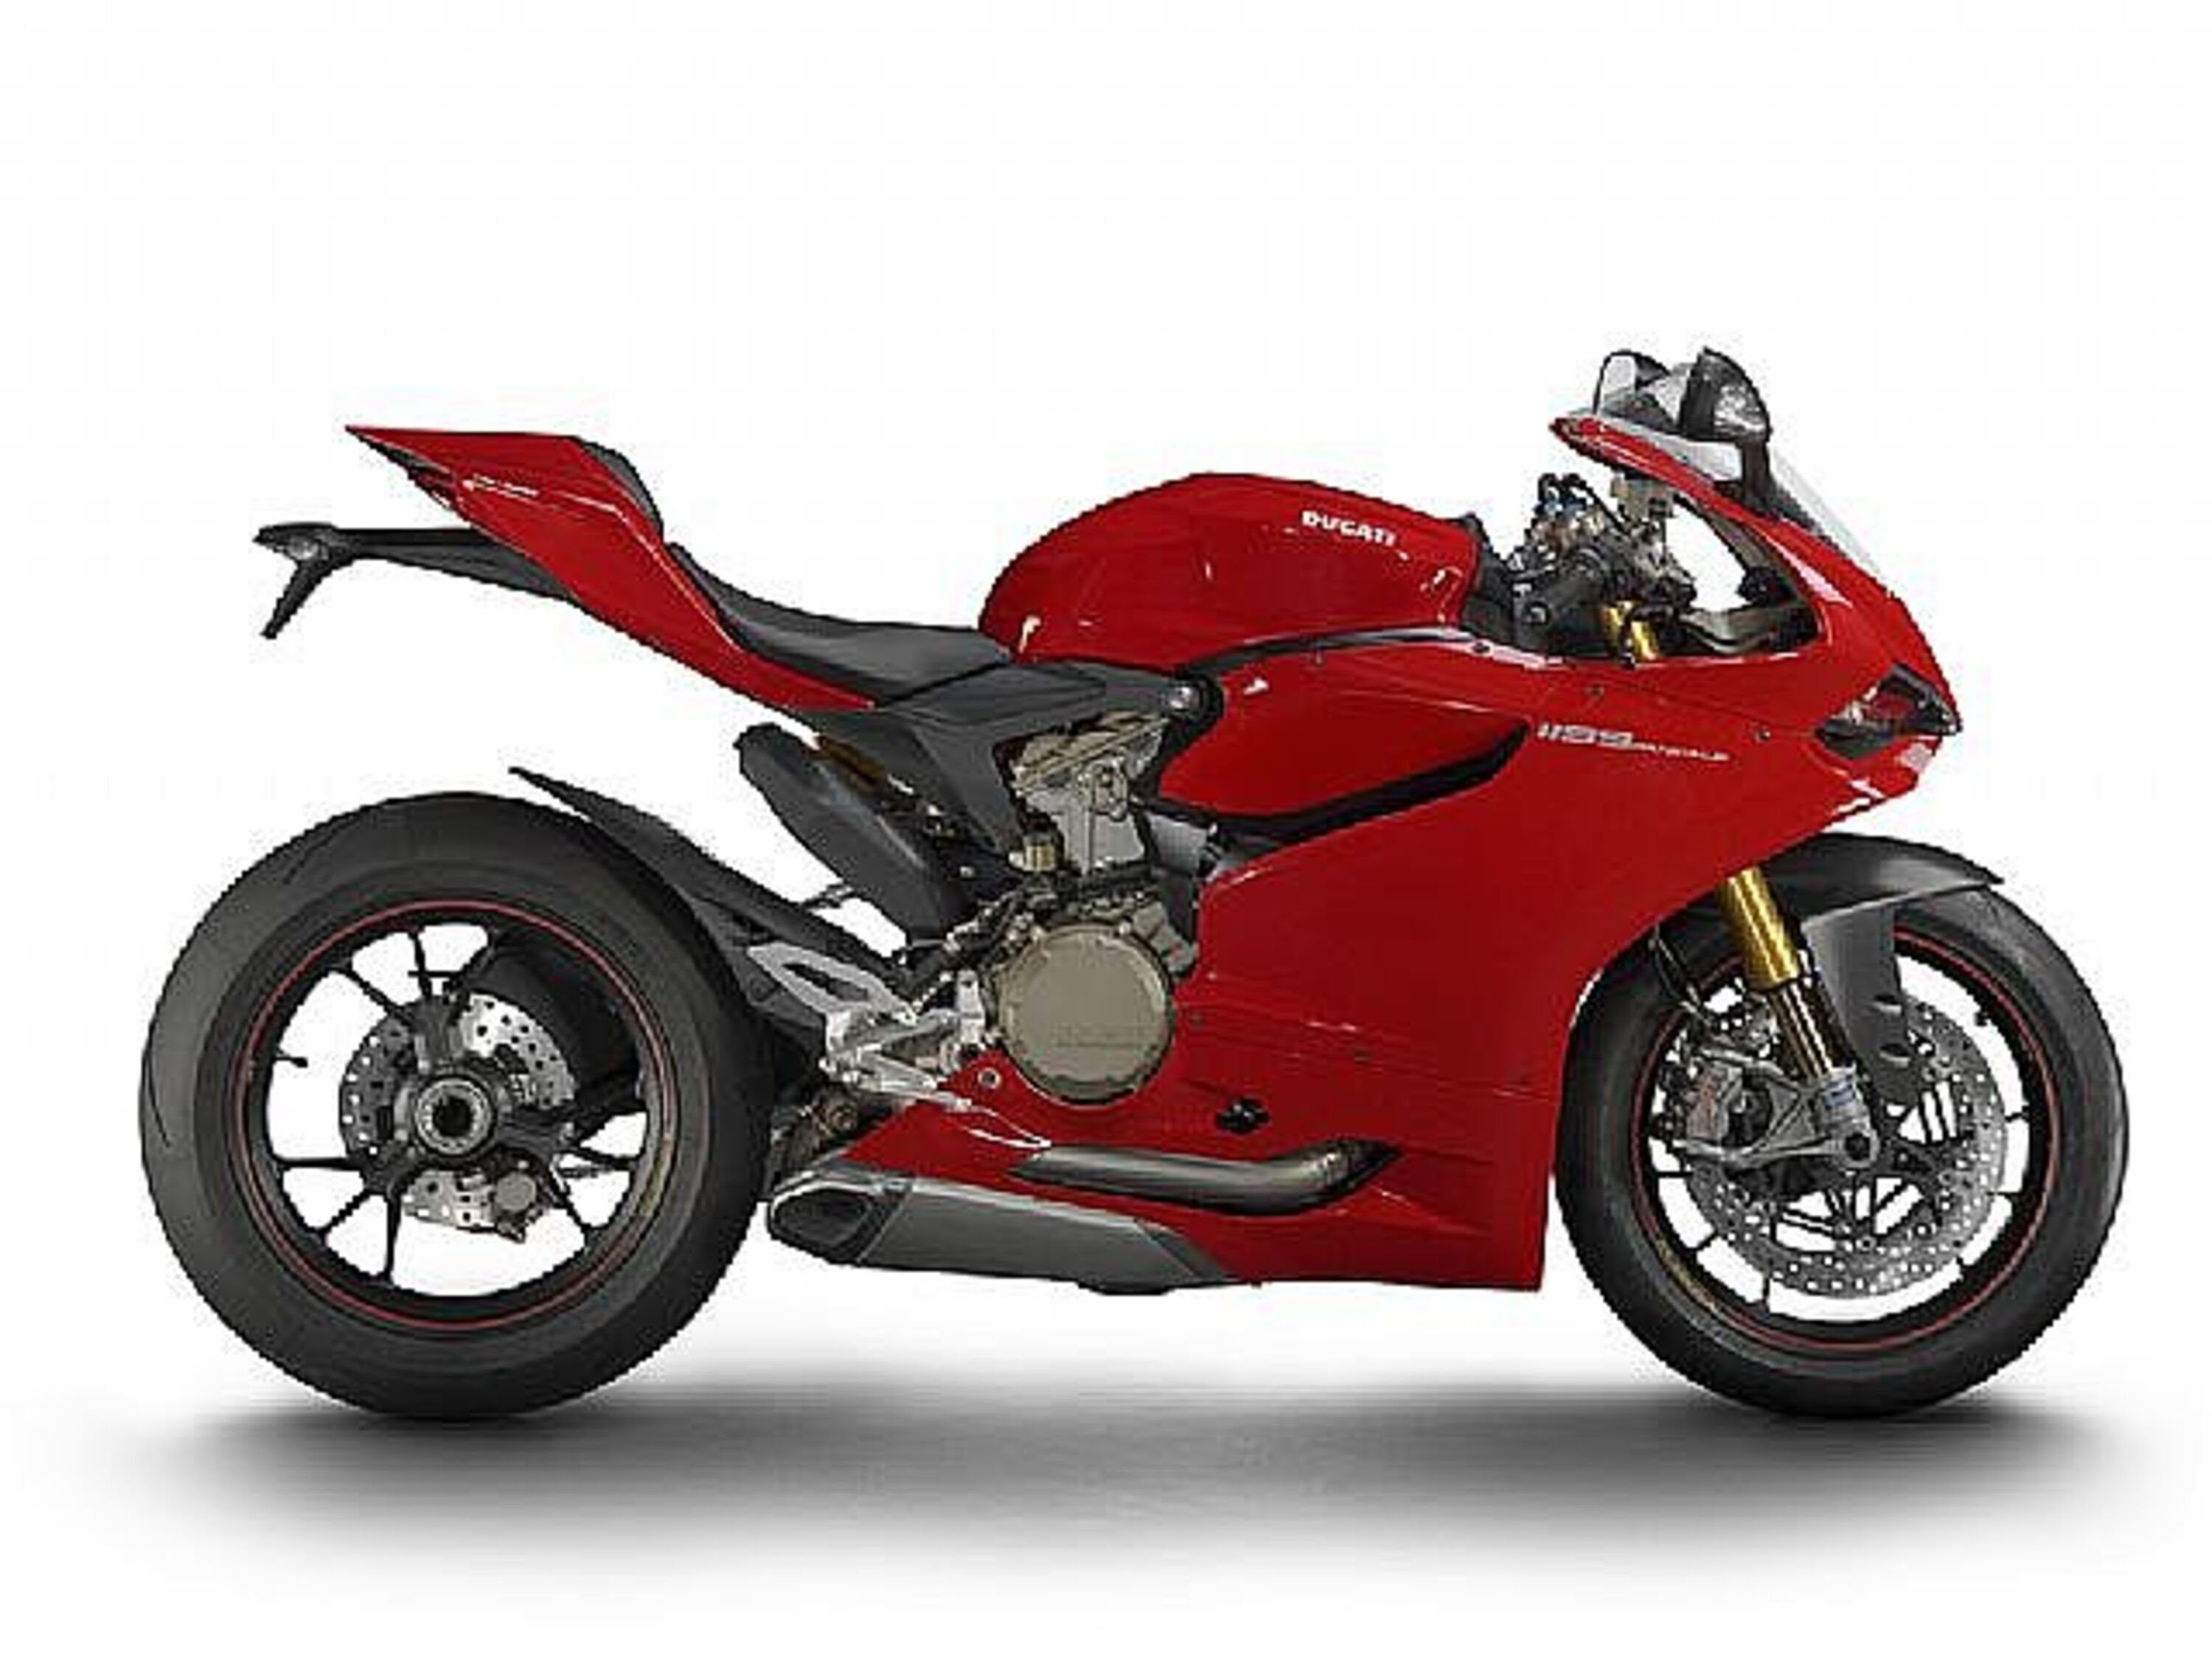 Ducati 1199 Panigale 1199 Panigale S ABS (2013 - 14)